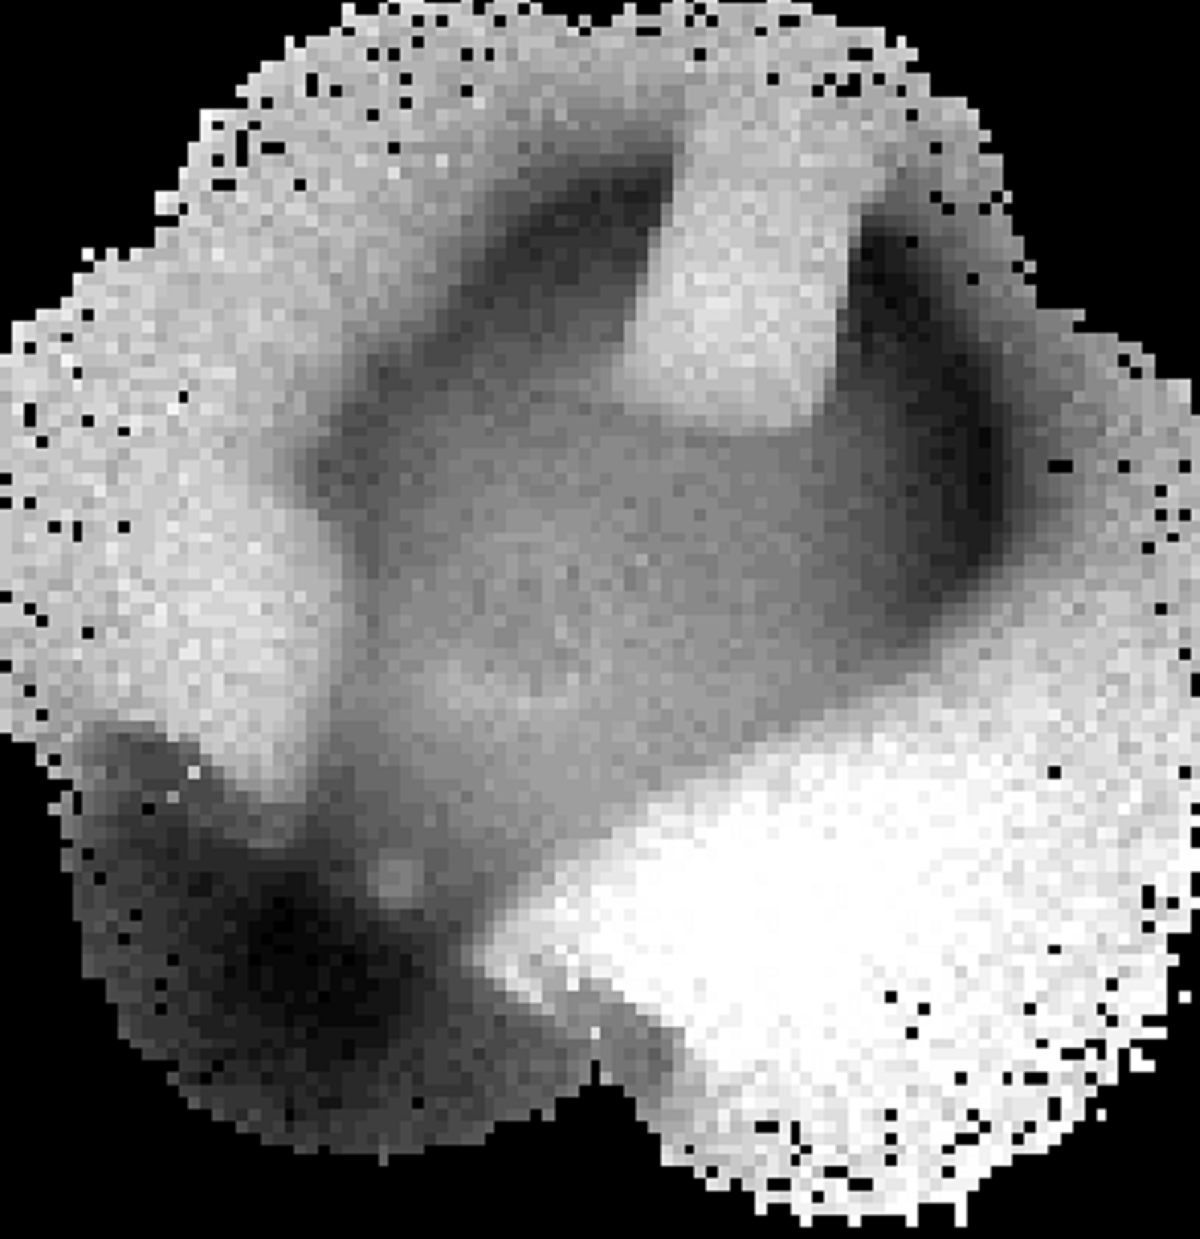 fishing tool lost in hole 2D xray image